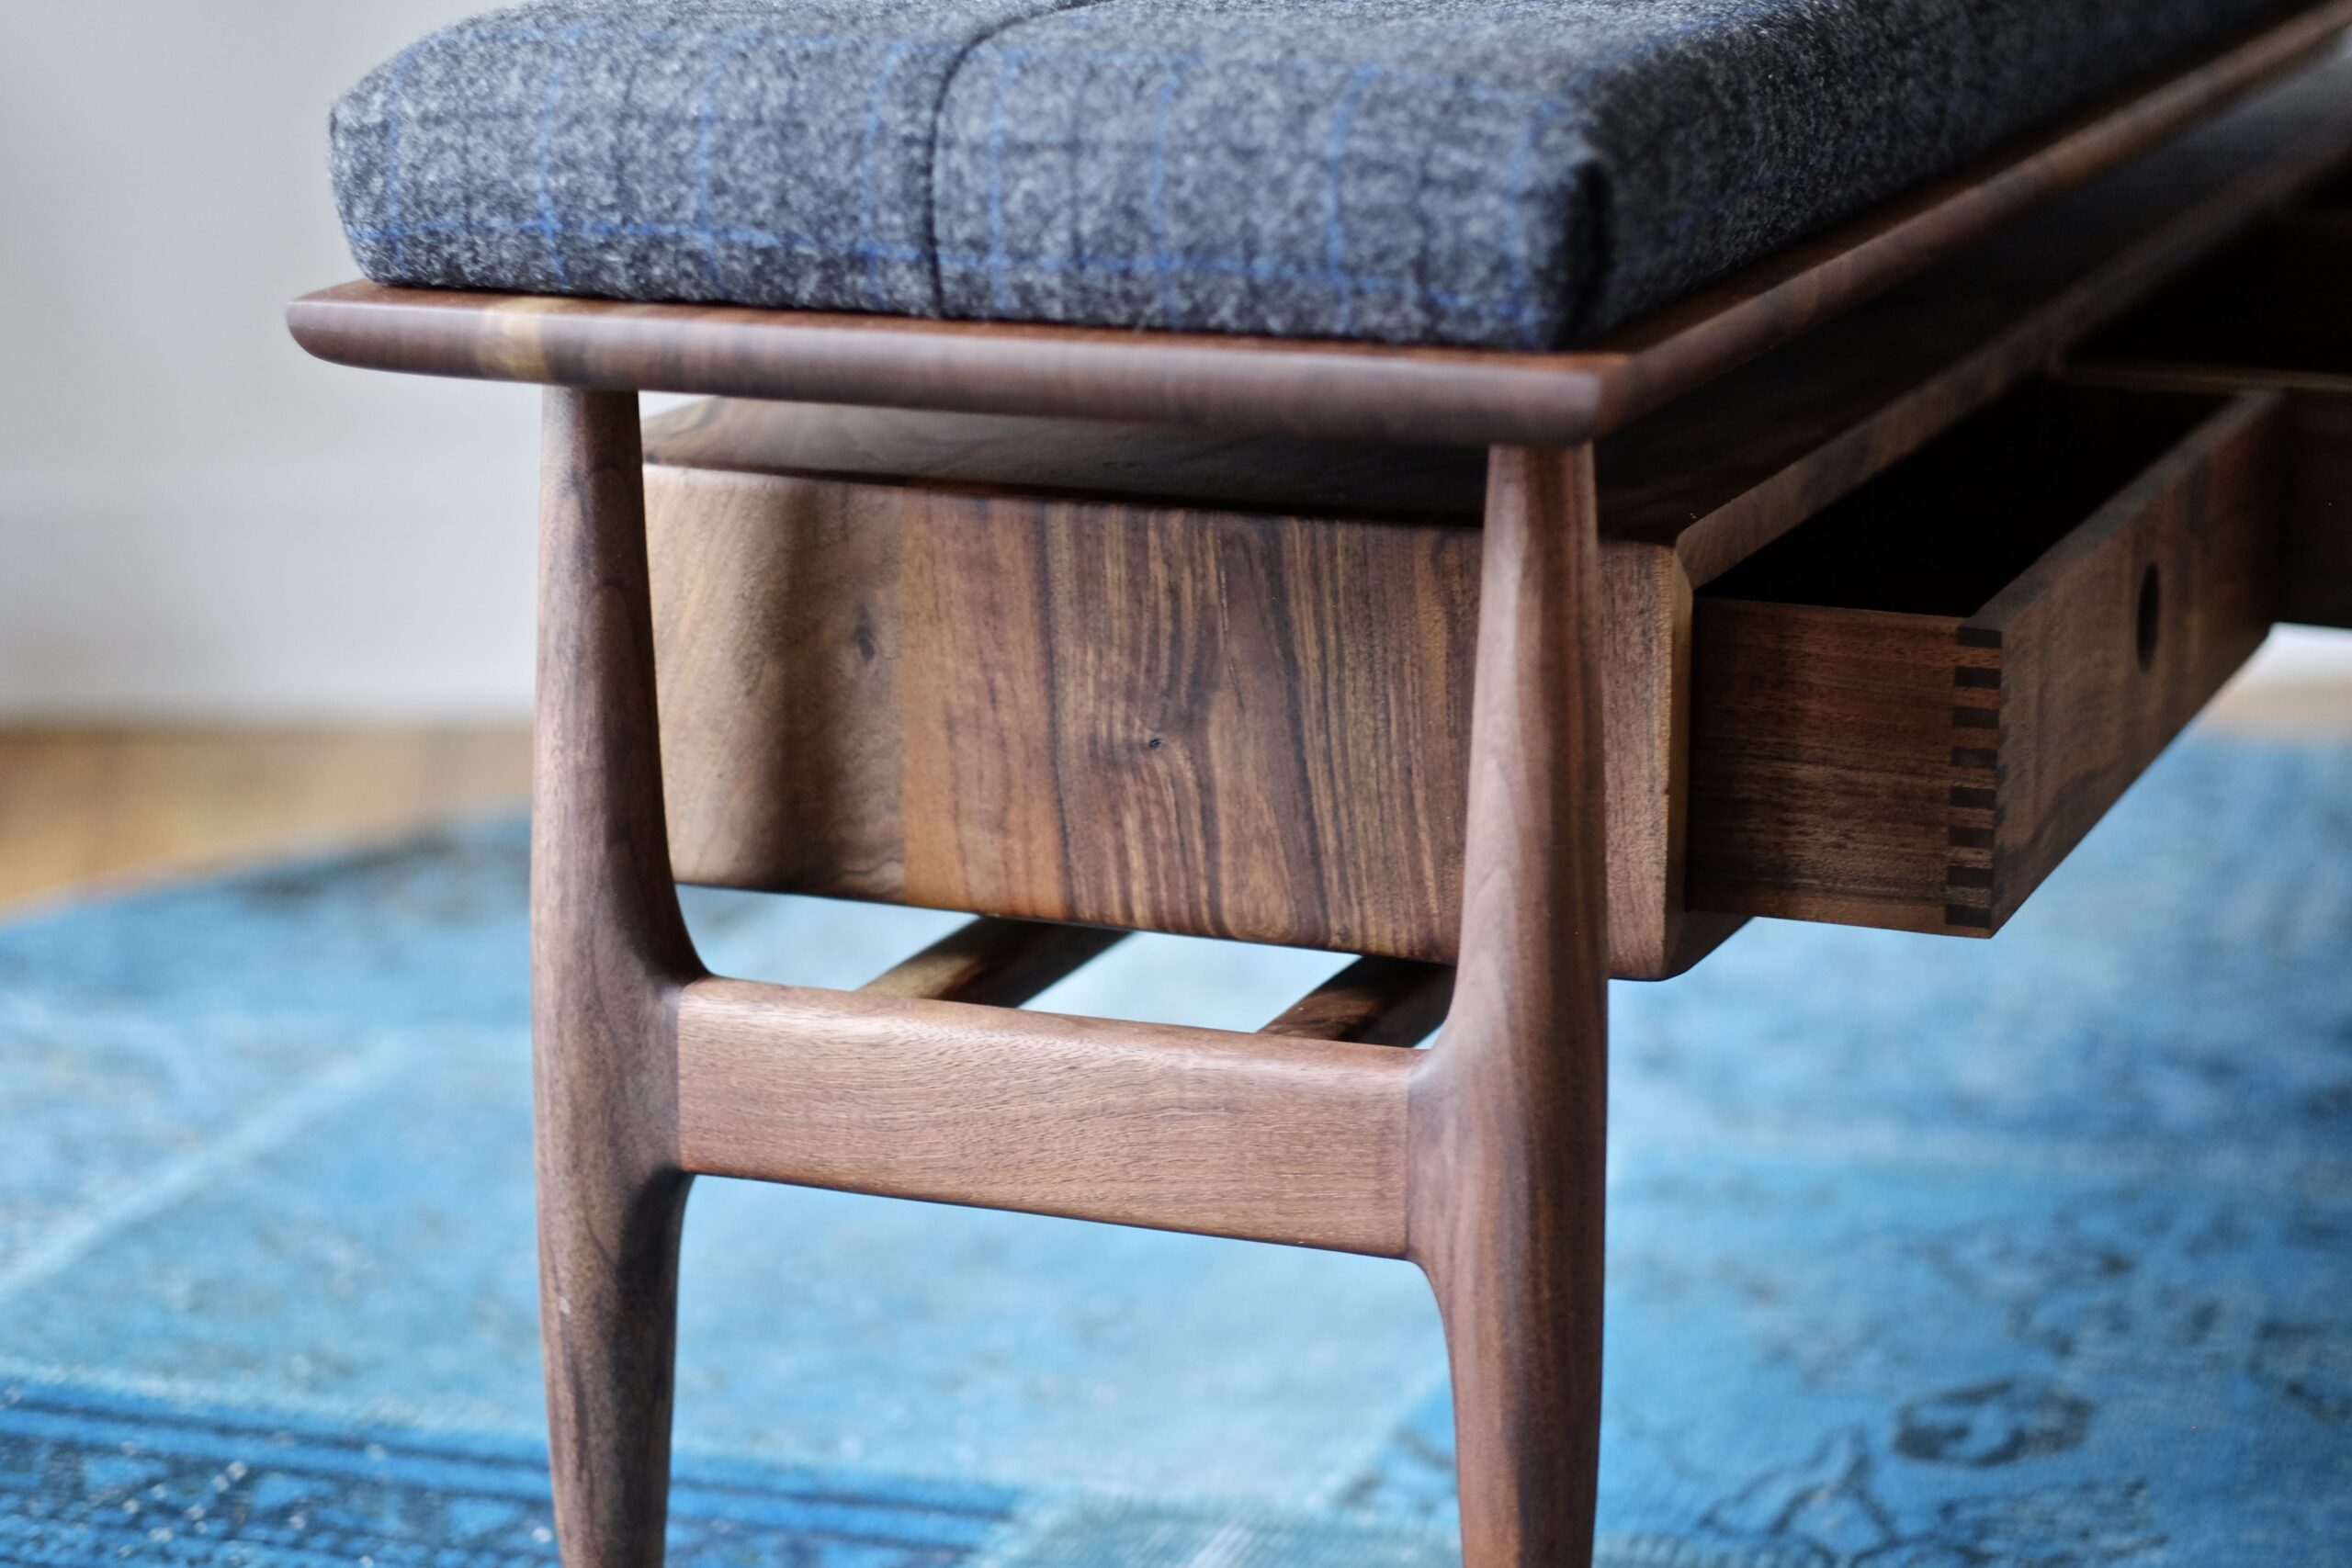 A walnut bench with a gray wool upholstered cushion and three drawers.